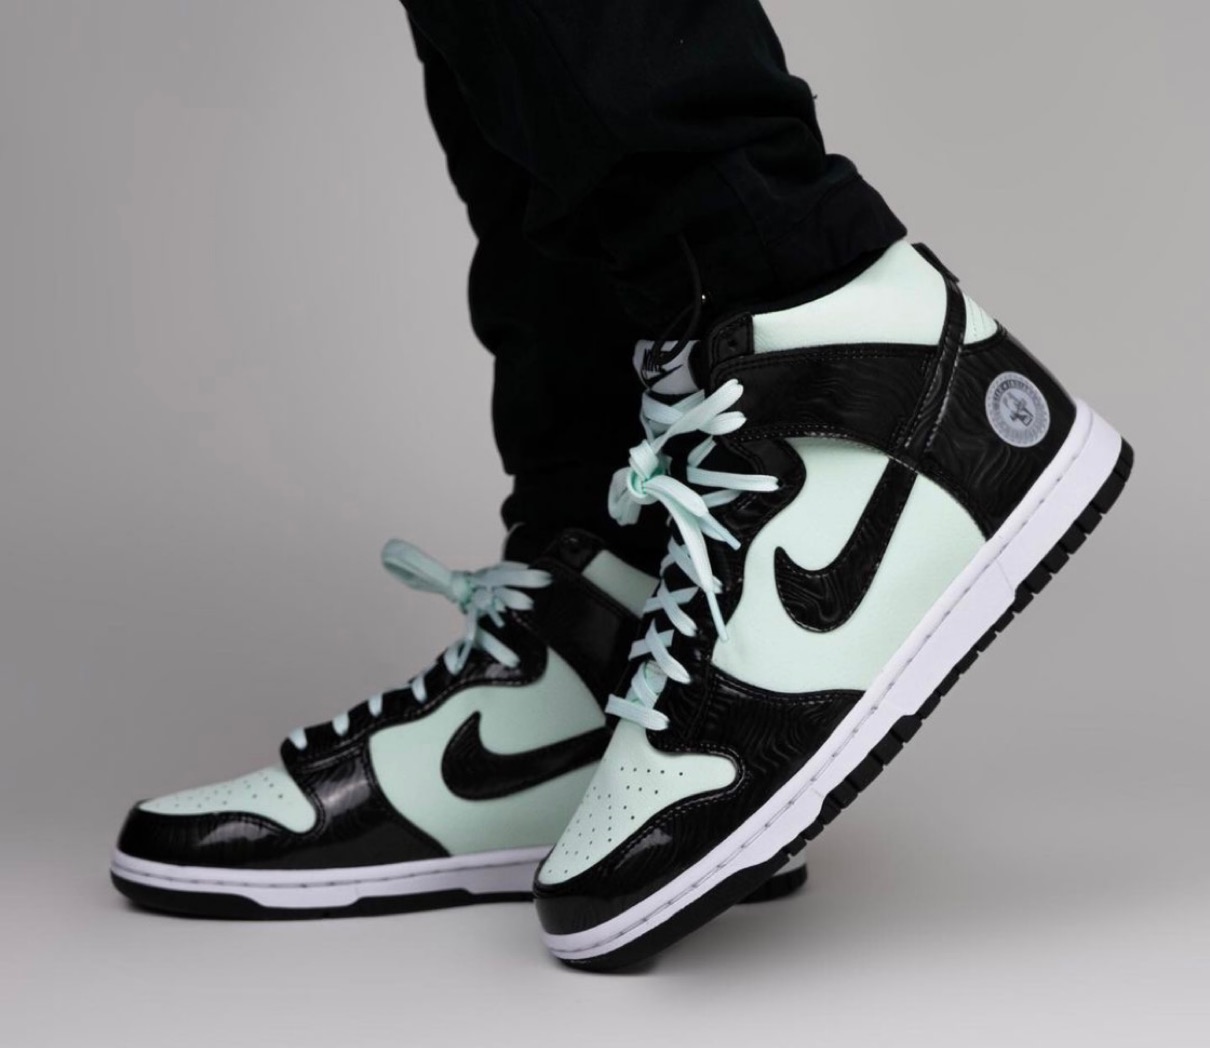 Nike】Dunk High “All-Star 2021”が国内3月9日に発売予定 | UP TO DATE